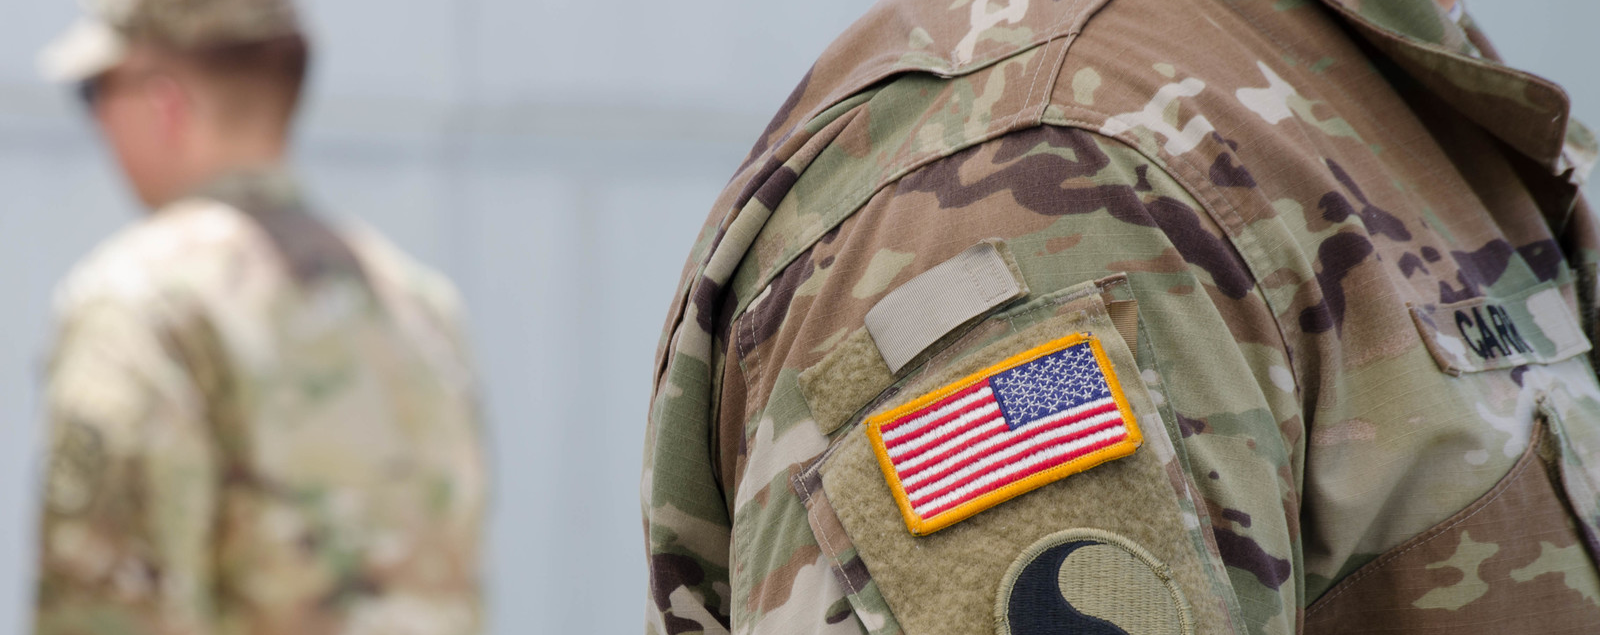 American flag patch on the shoulder of a guy wearing an Army uniform